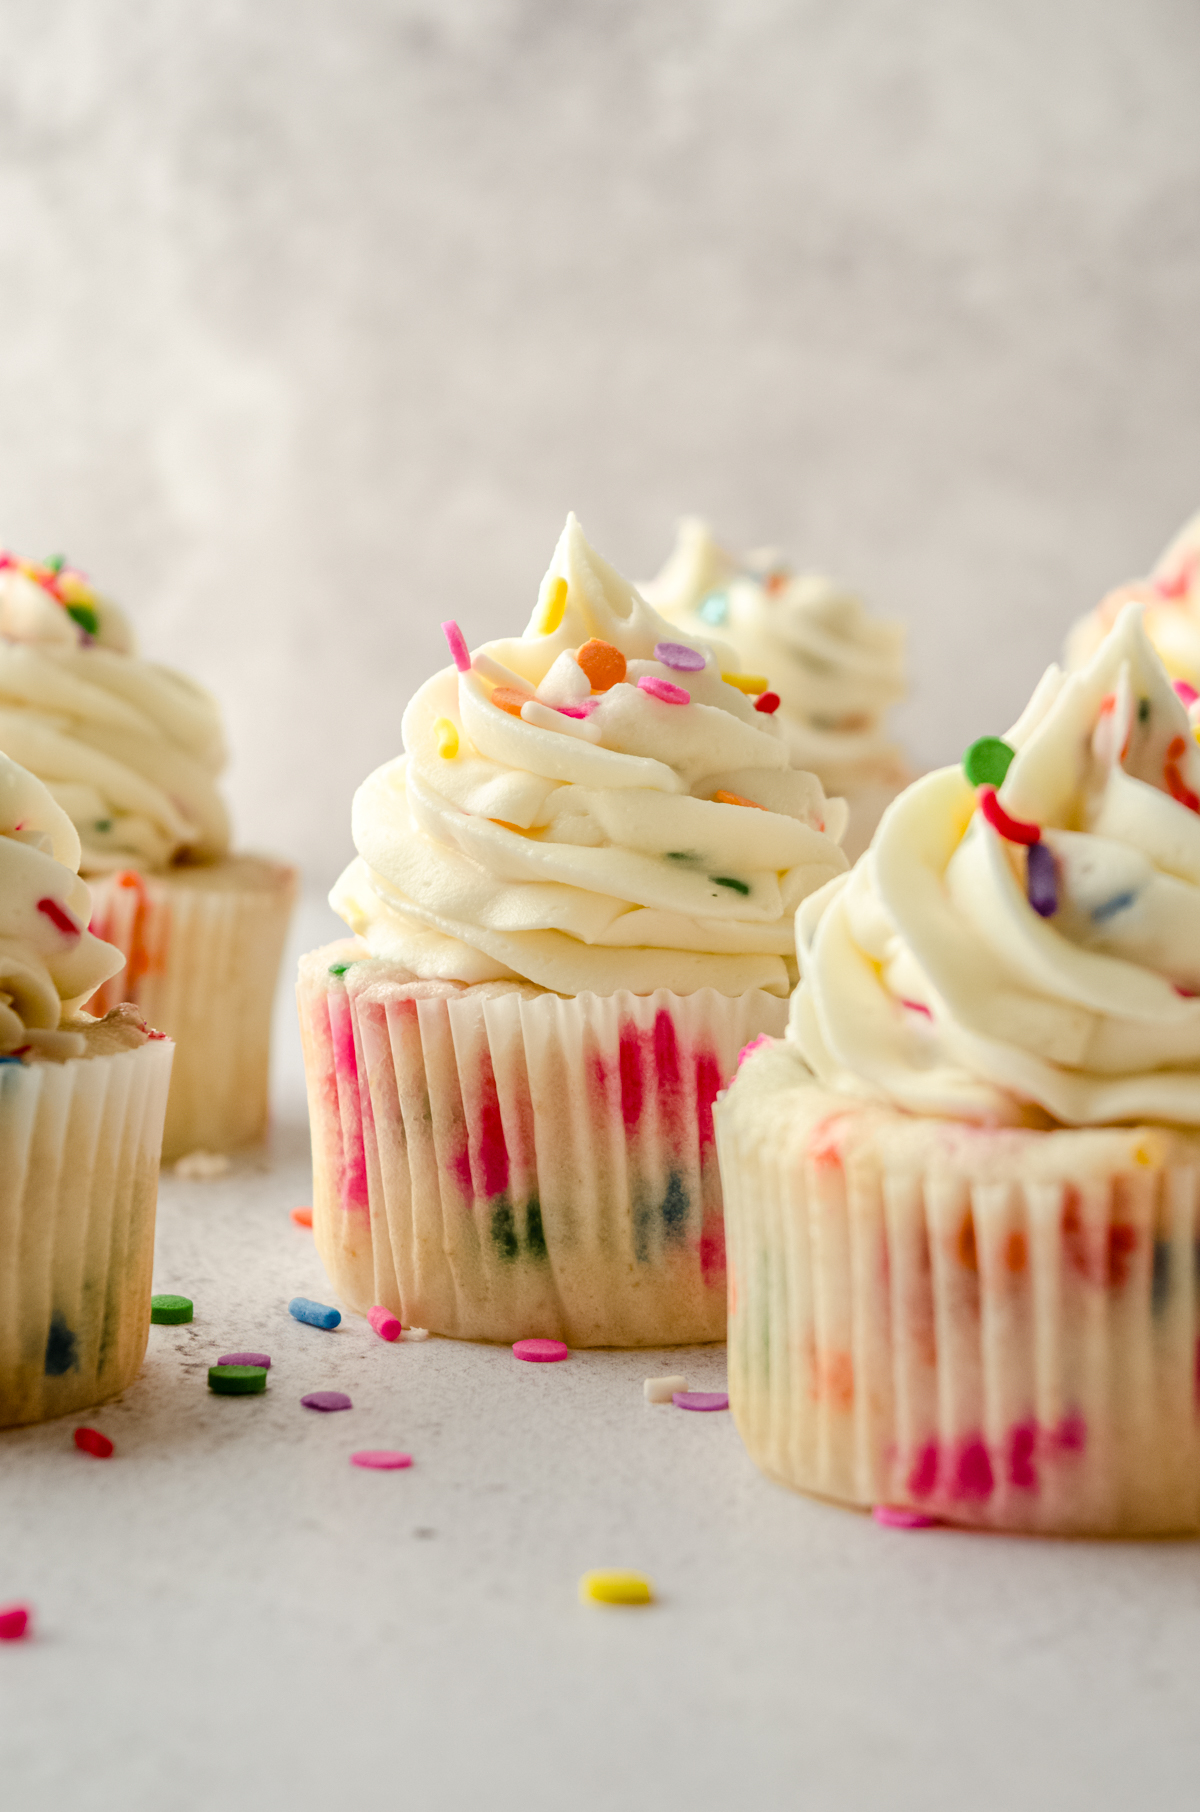 Funfetti cupcakes sitting on a surface.